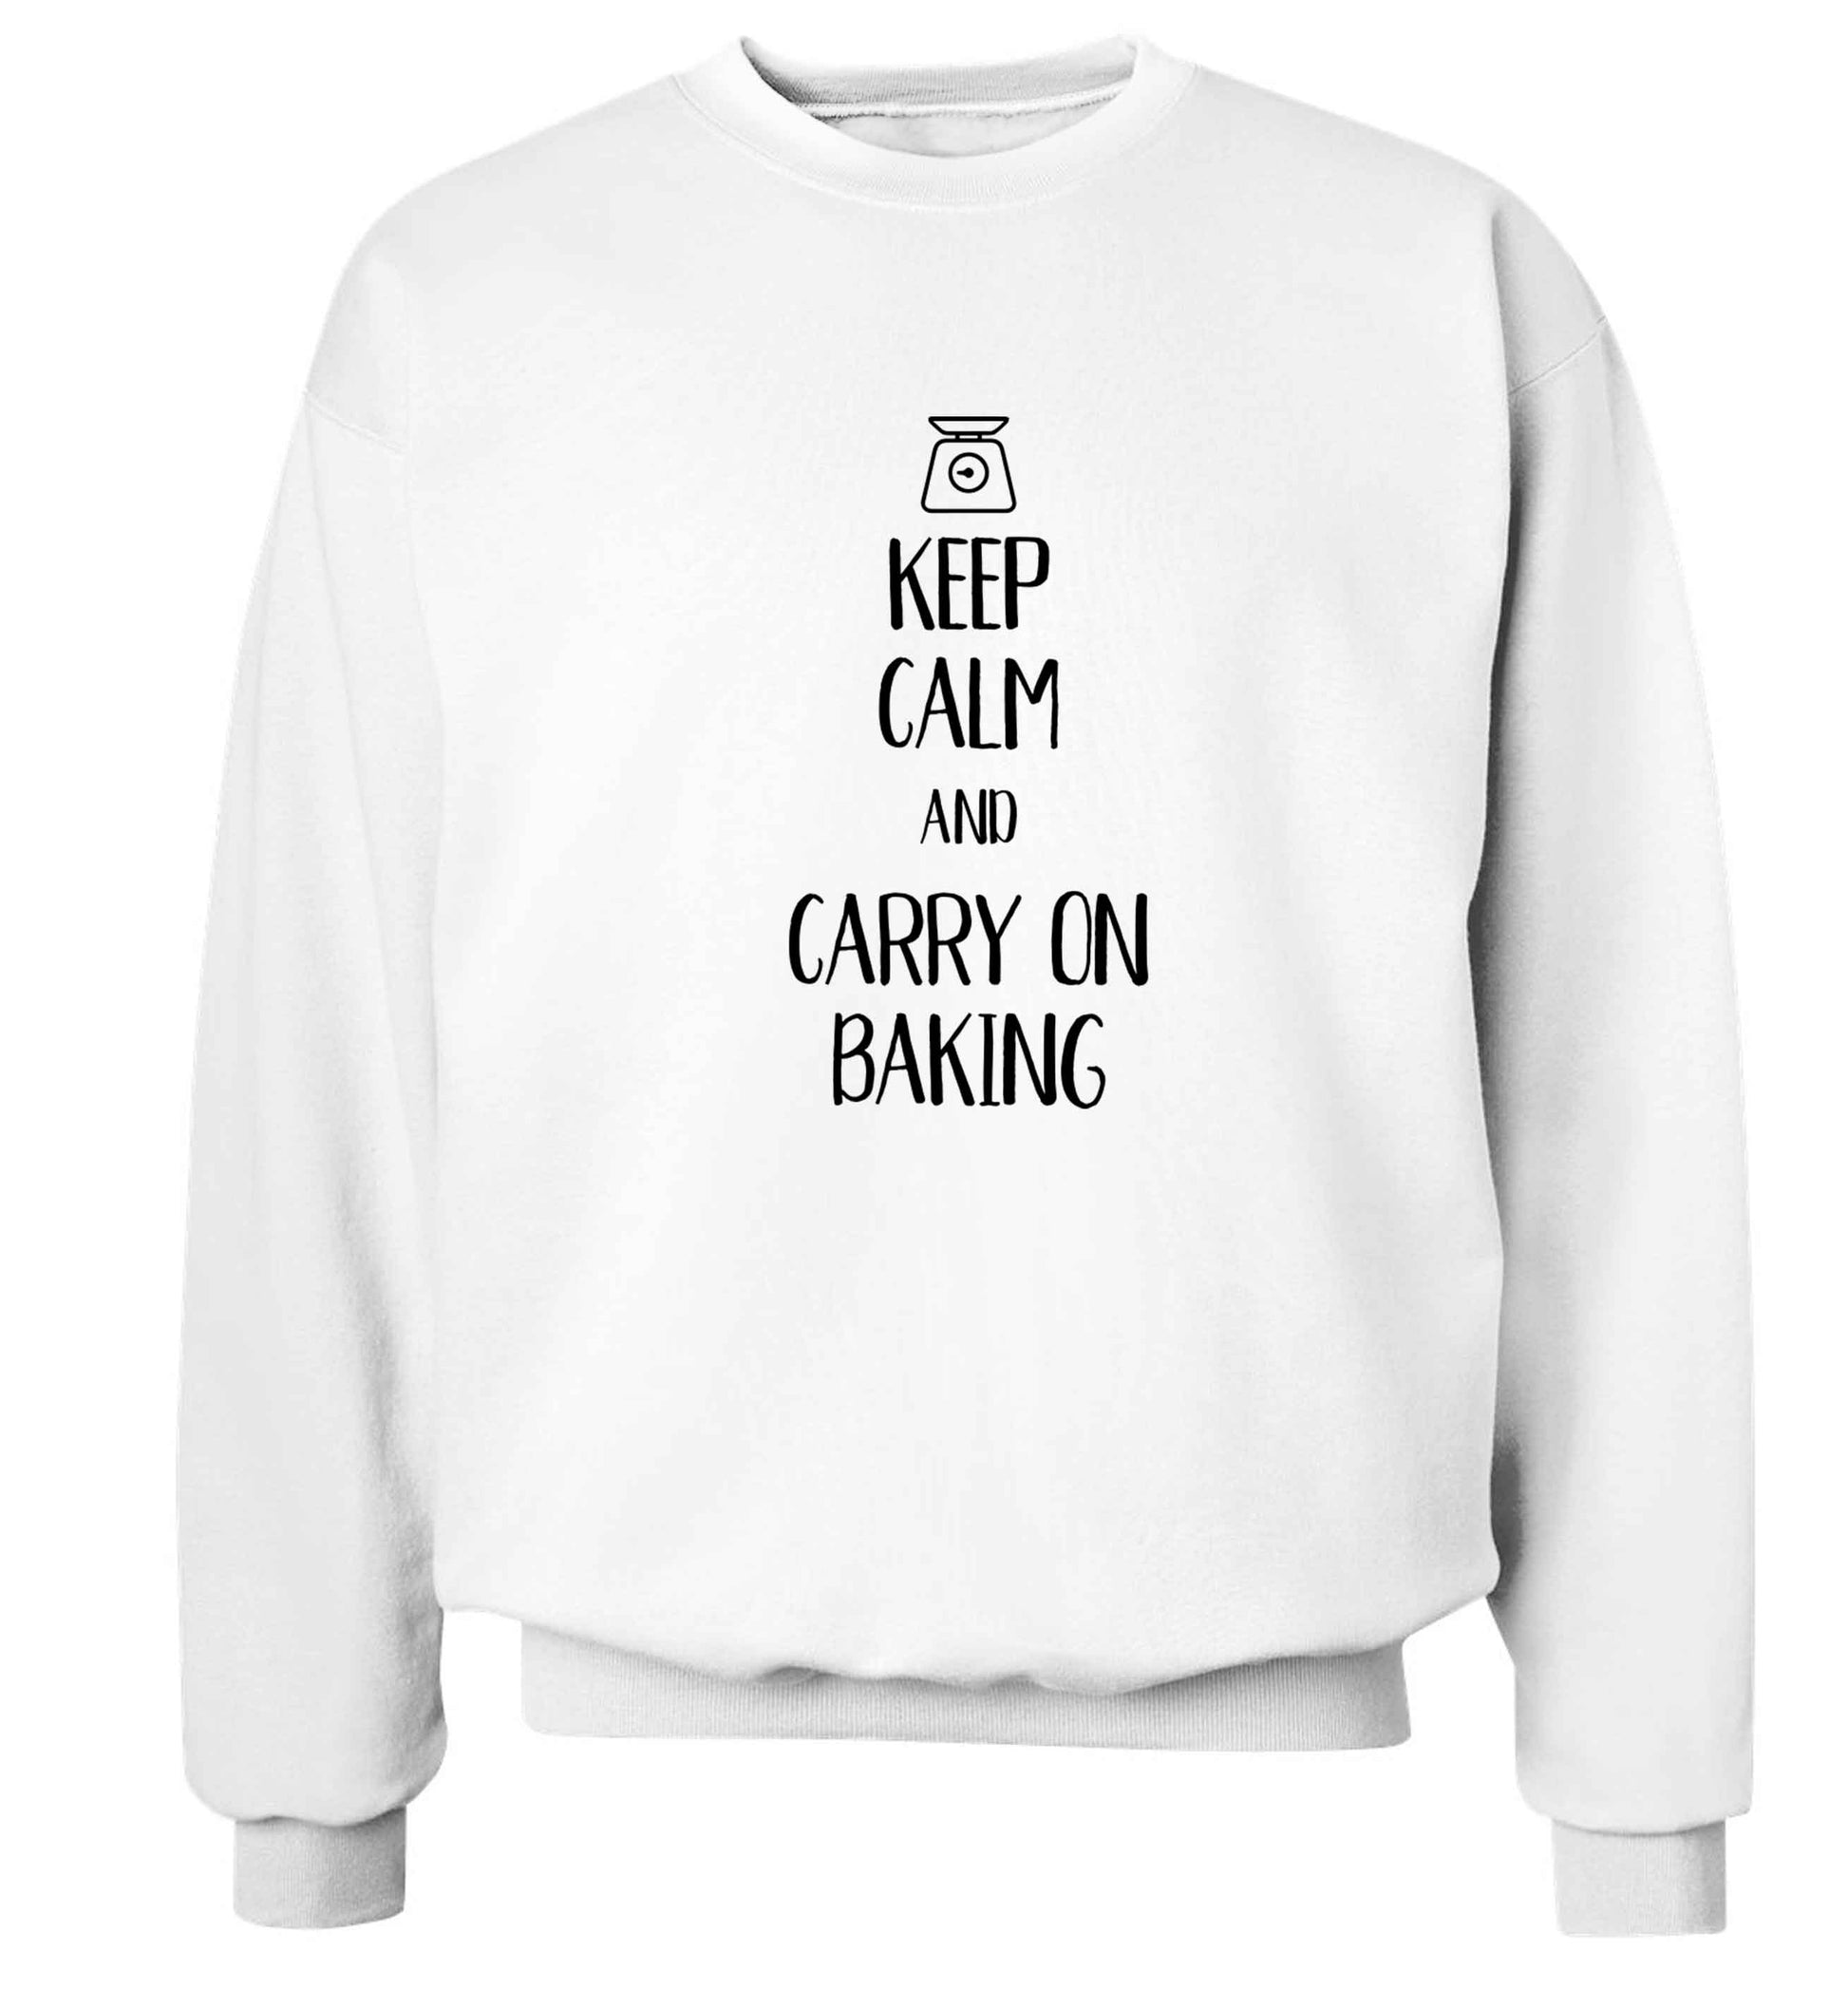 Keep calm and carry on baking Adult's unisex white Sweater 2XL